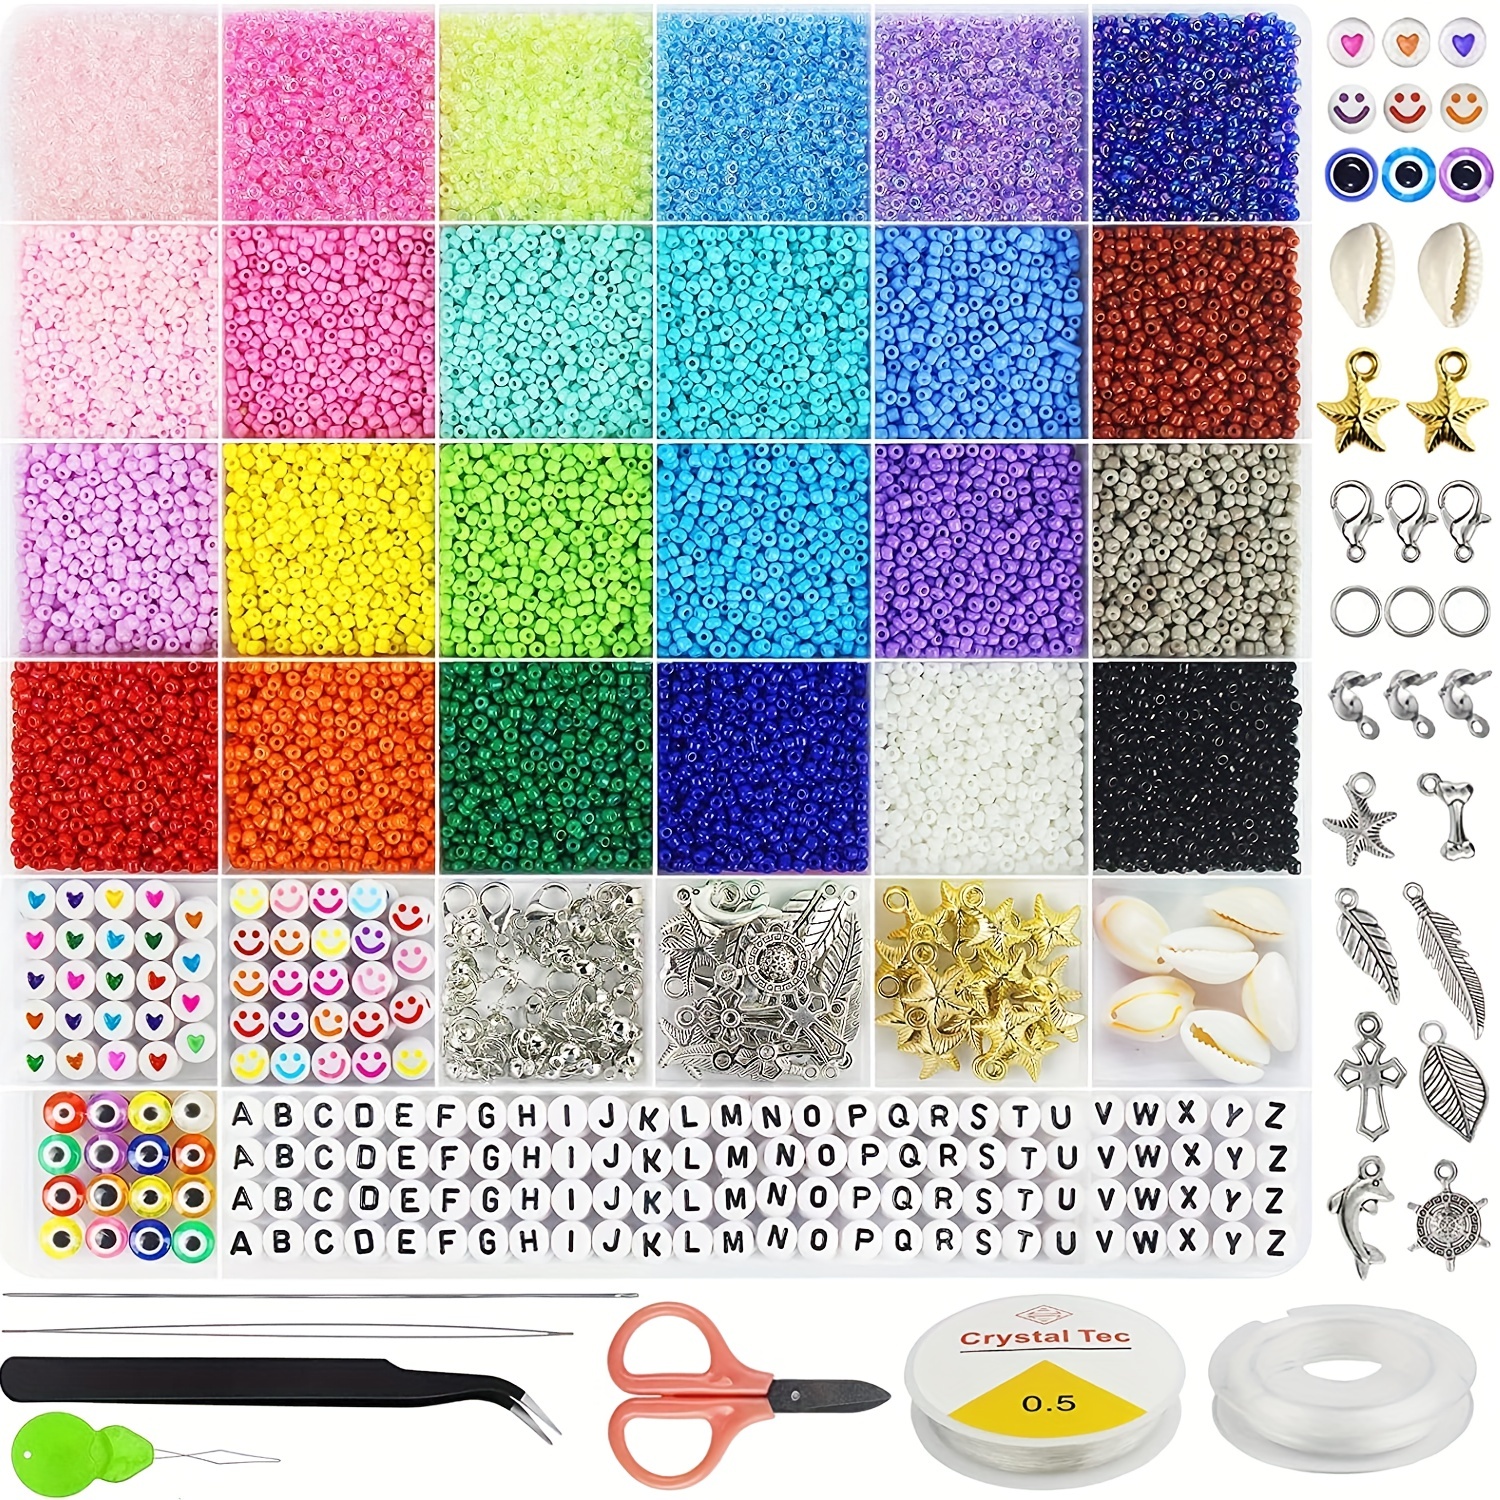 Jewelry Making Bead Kits for Girls Over 10000 PCS Bracelet Making Kit Beads  for Kids Includes Clay Beads, Plastic Beads, Scissors, Strings and  Accessories with 3-Layer Storage Box Gift Crafts : Buy